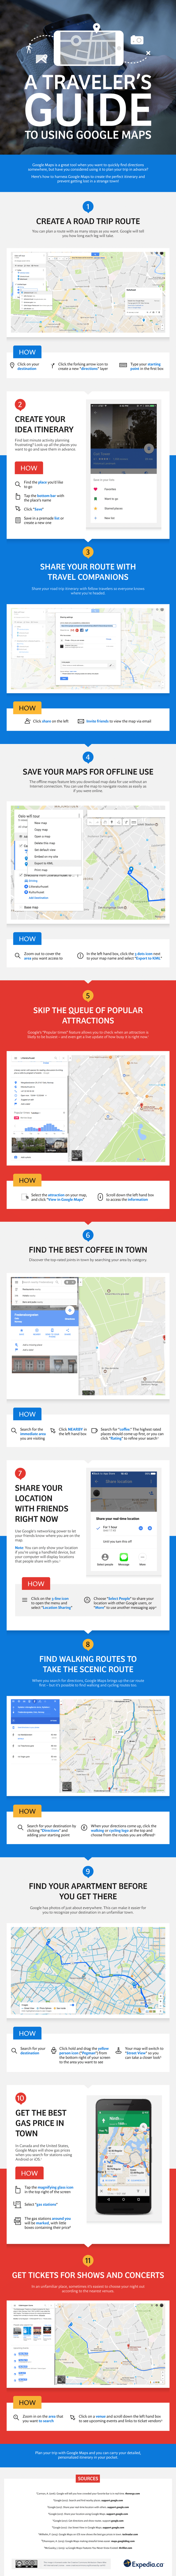 10 Best Google Maps Tips and Tricks That You'll Love - infographic